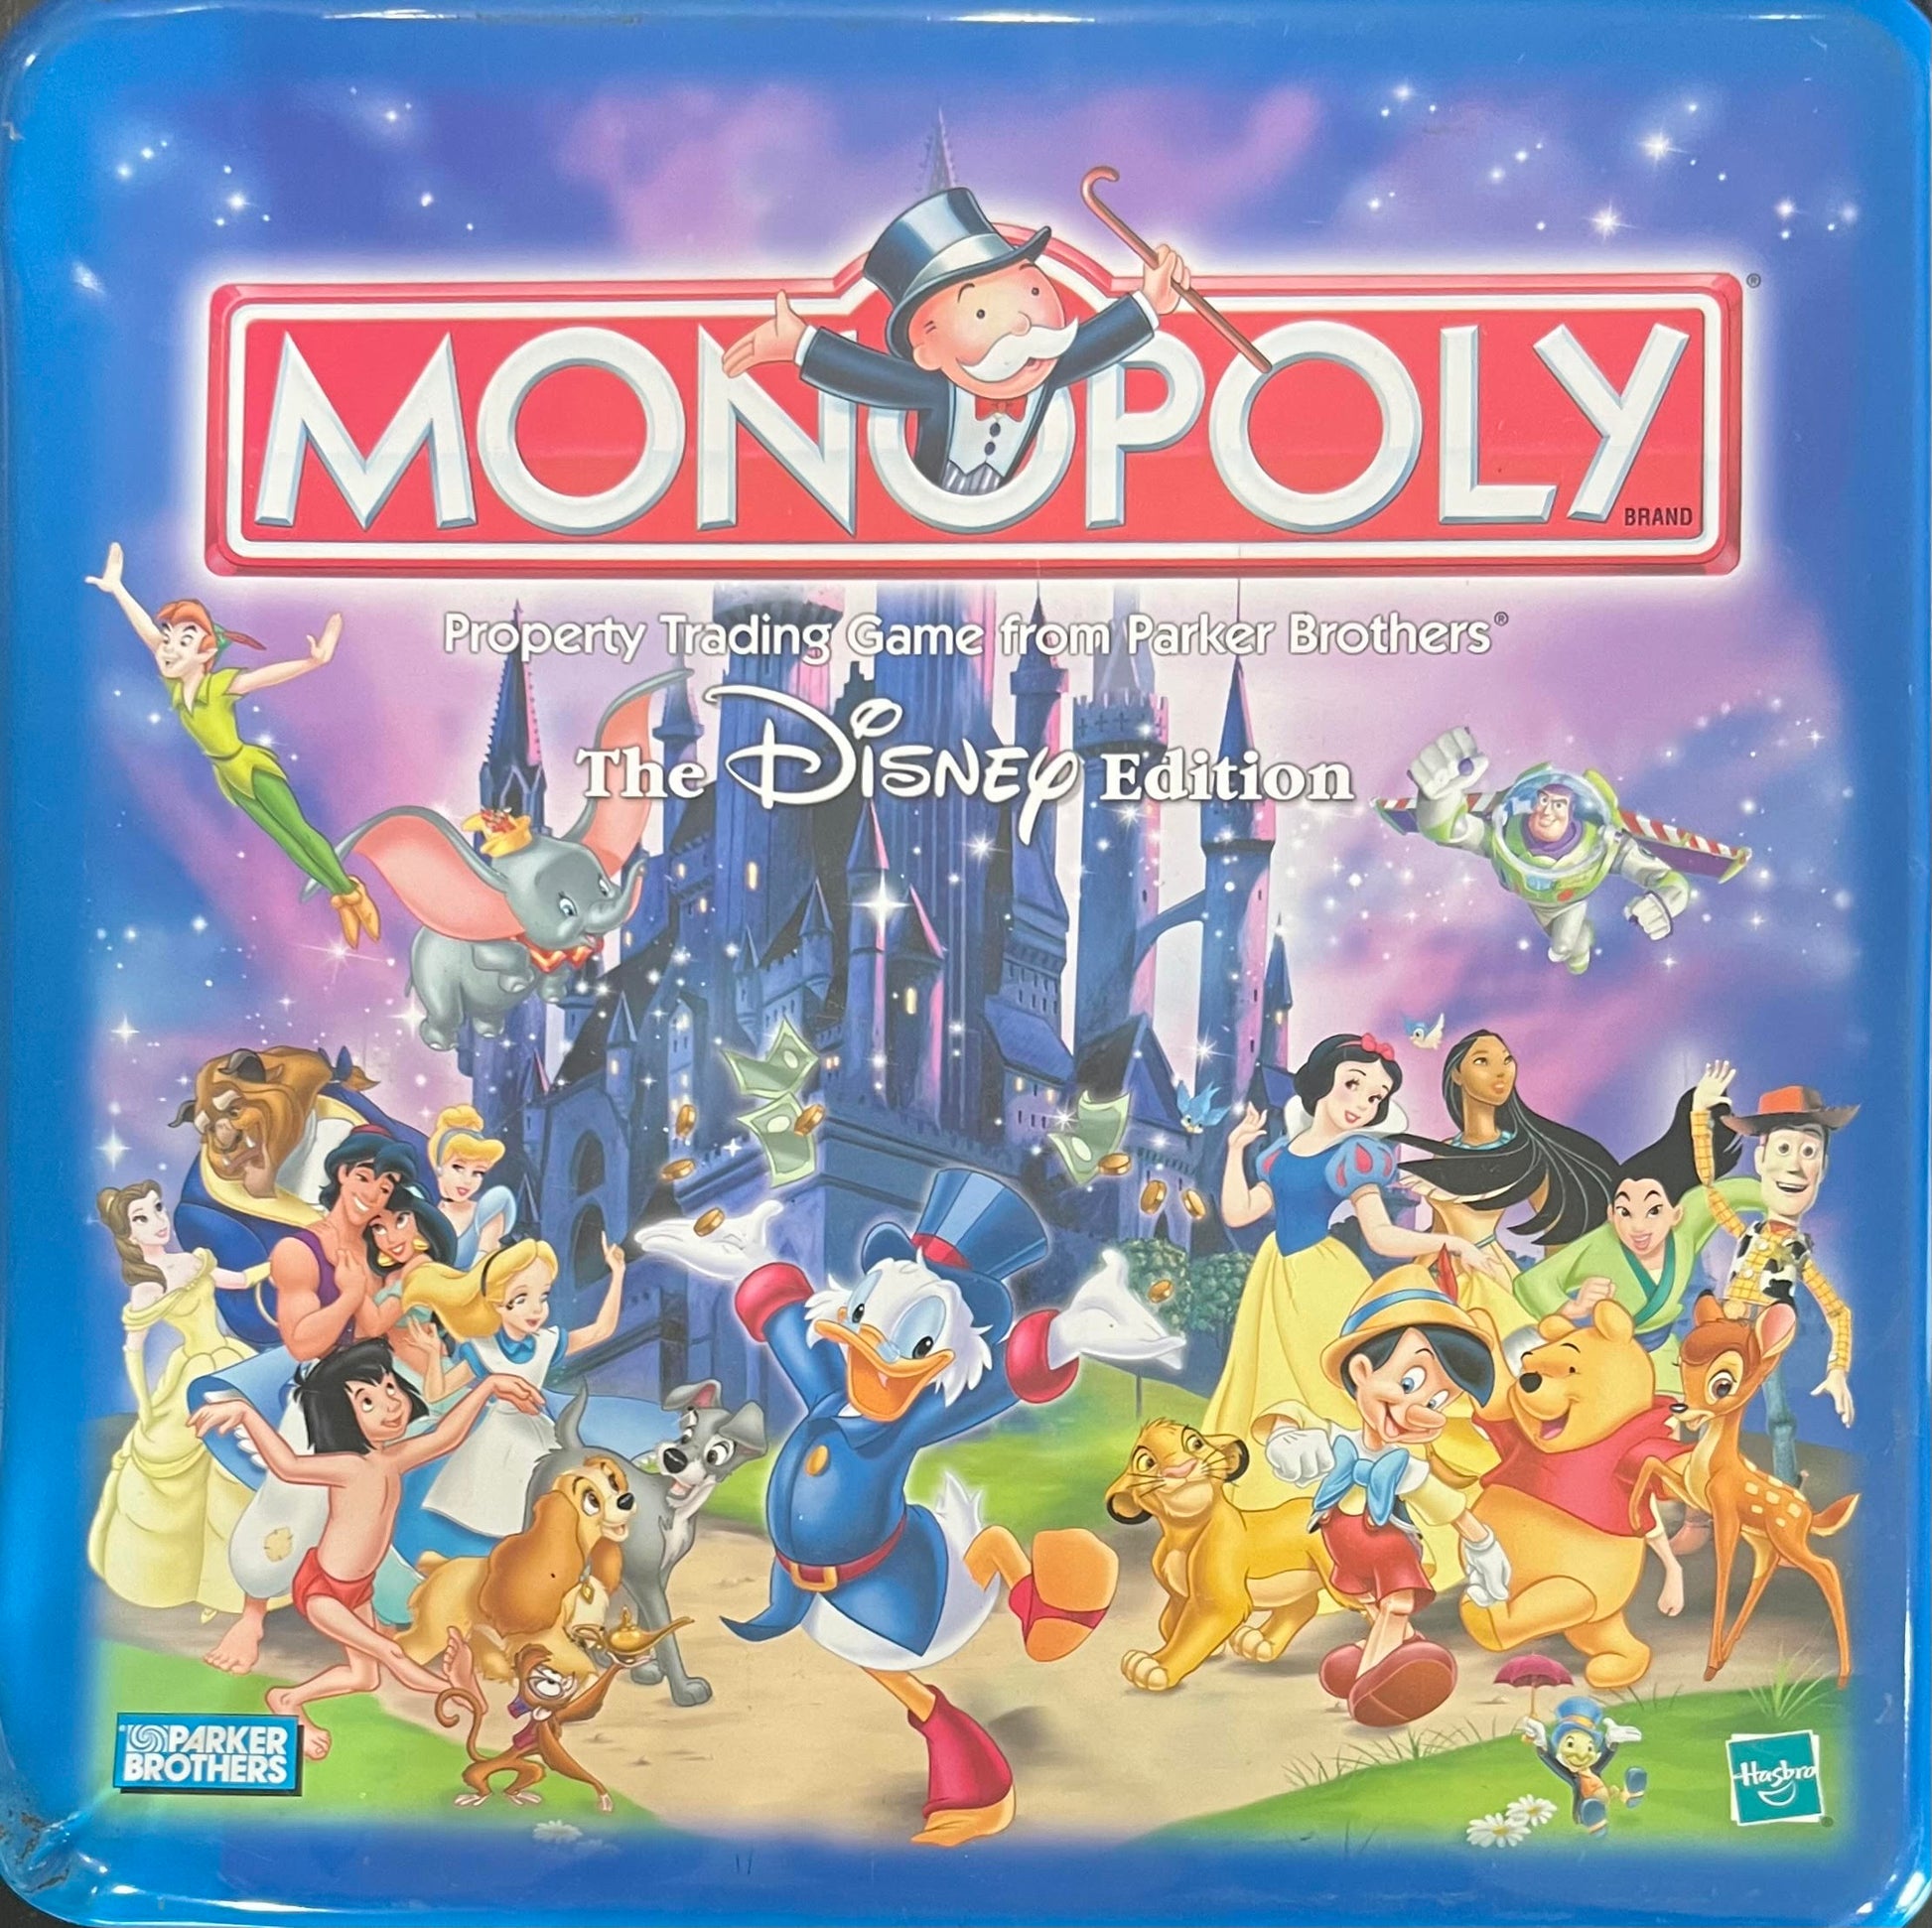 Conundrum House Game Library - Monopoly - the Disney Edition tin front cover.